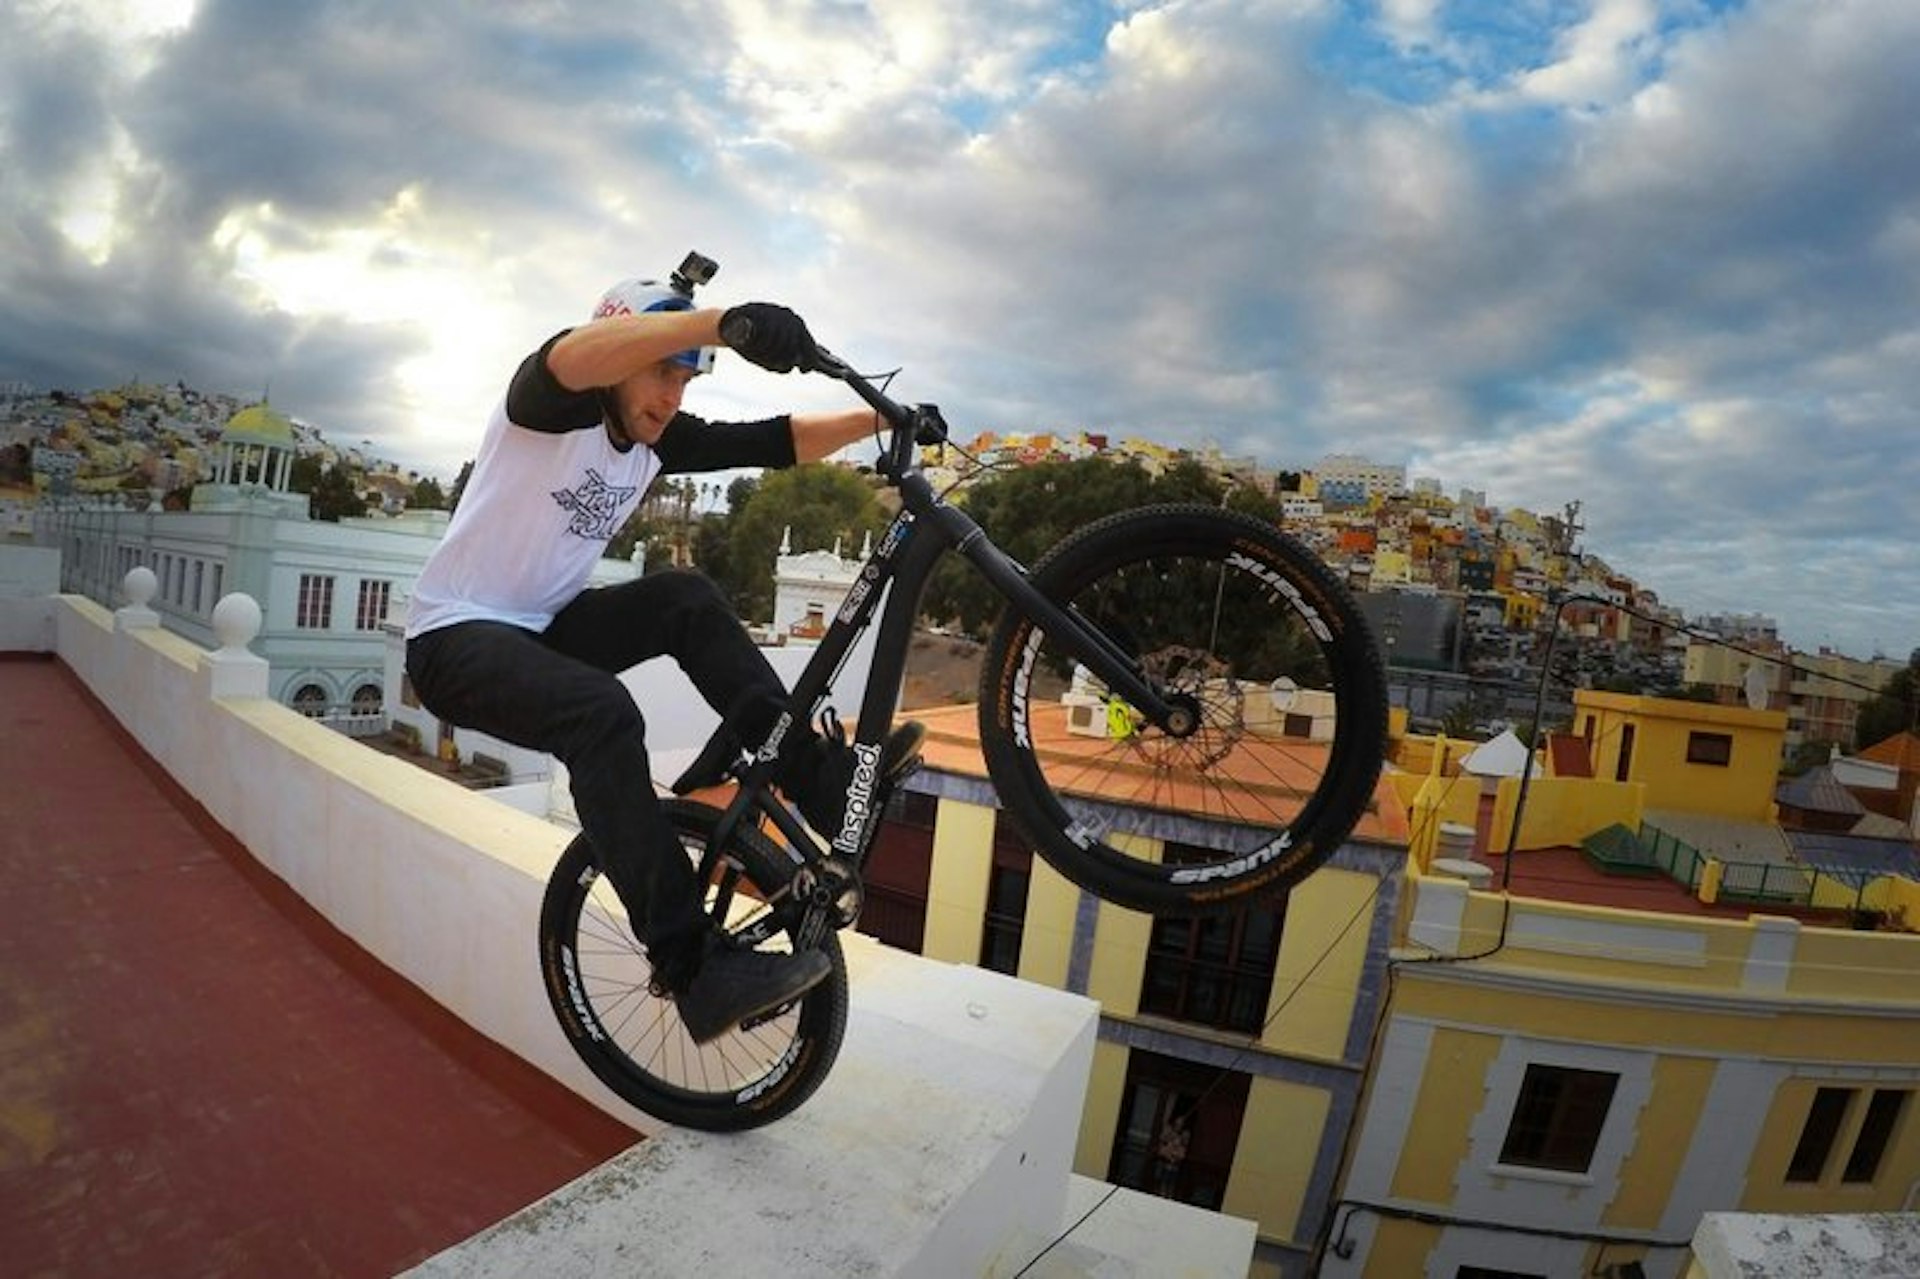 Video: Gravity-defying Danny MacAskill tears it up on Gran Canaria’s rooftops